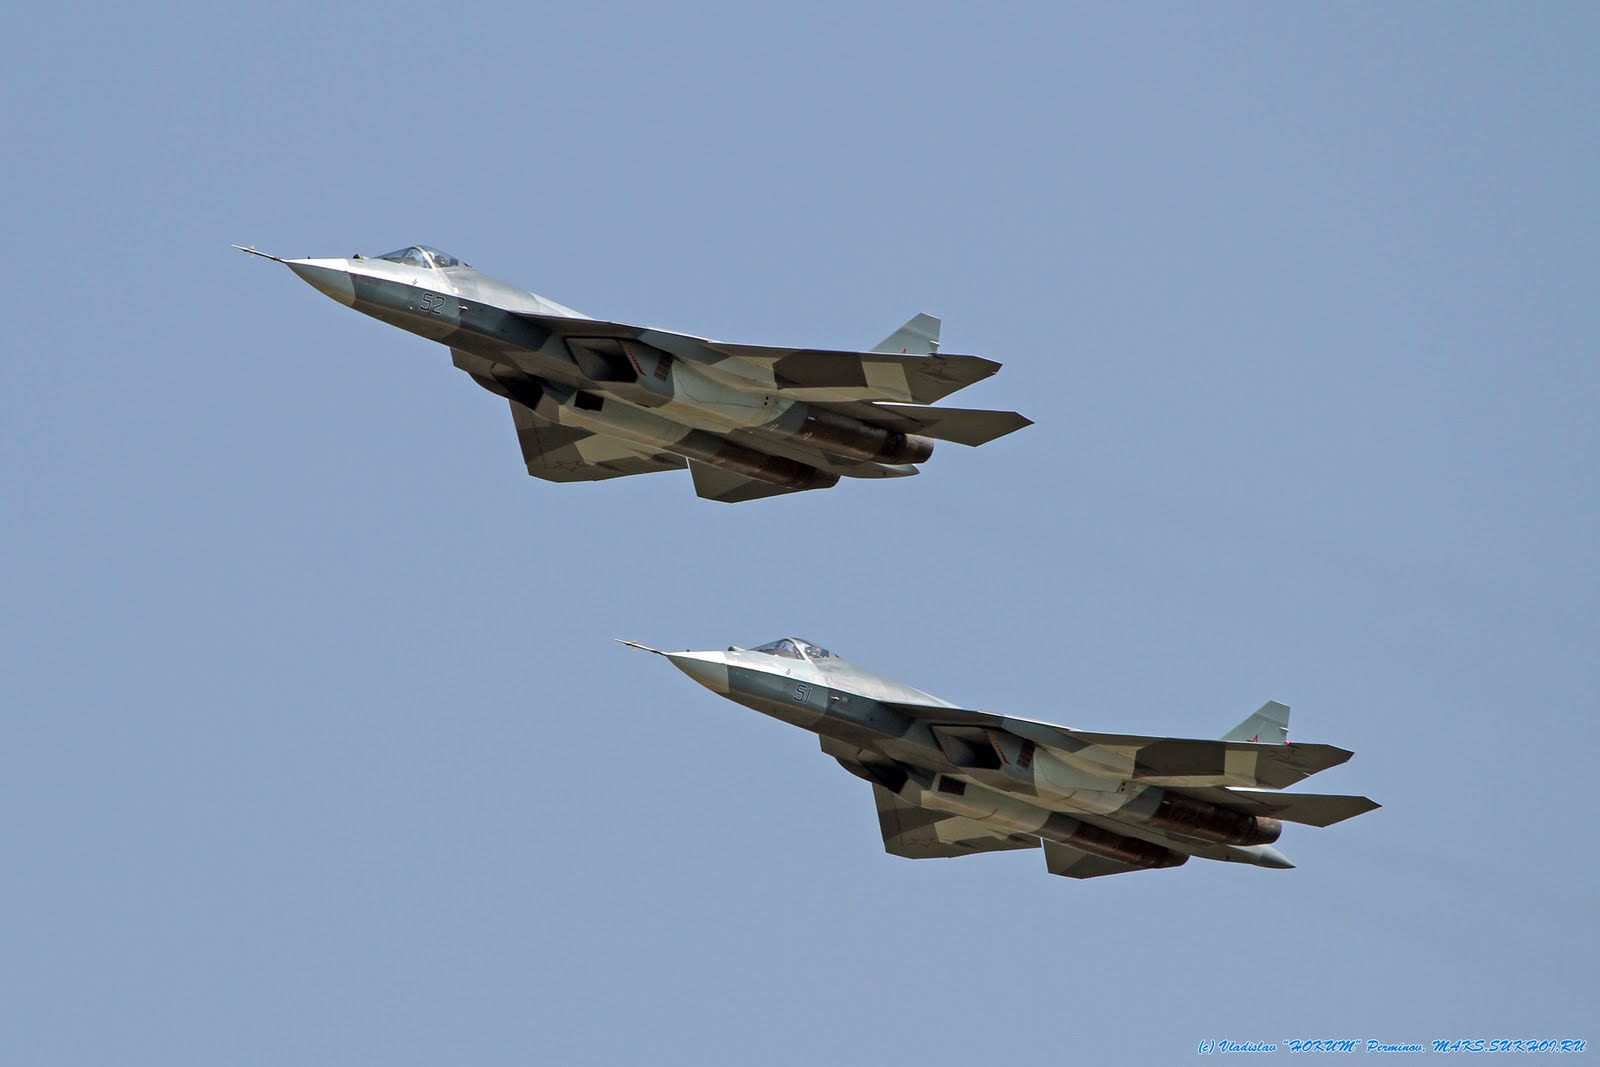 Two+Russian+PAK-FA+Stealth+Fighters+Flying+Together.jpg